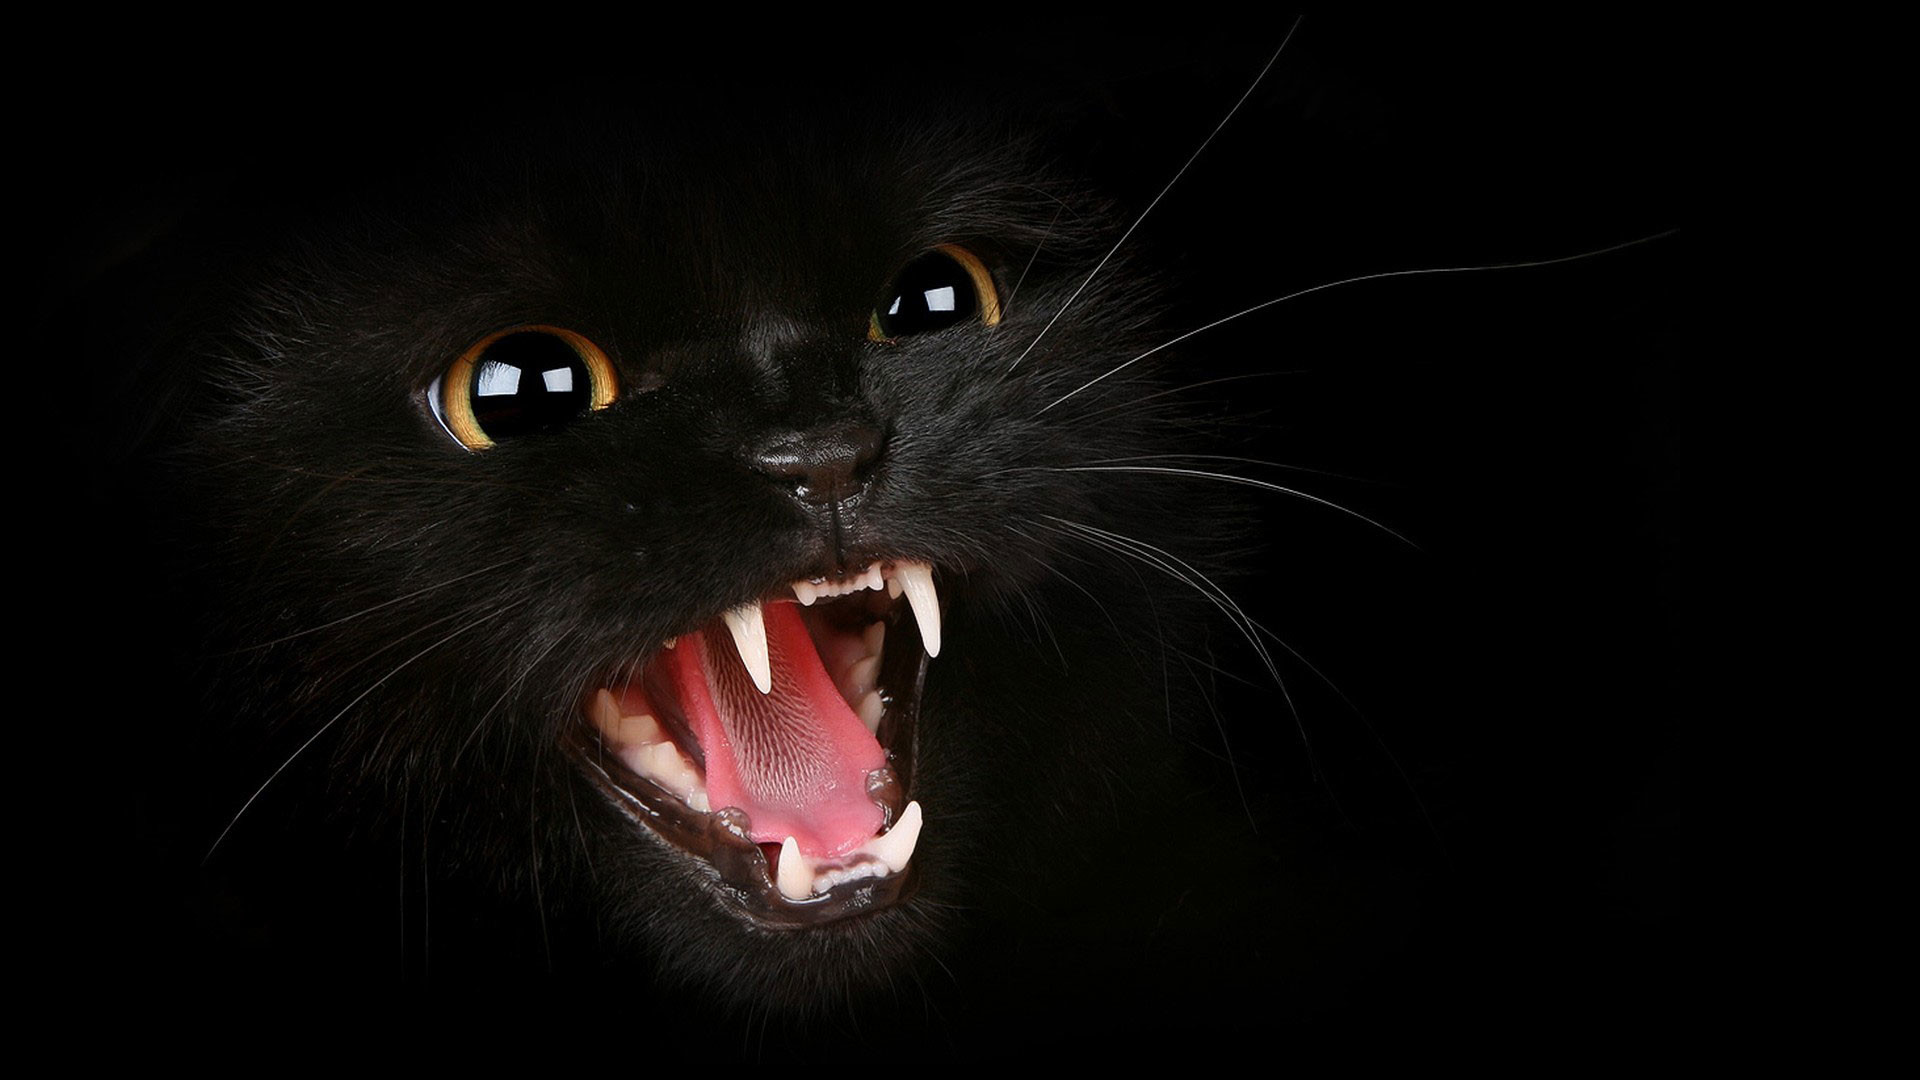 1920x1080 ... angry black cat hd quality desktop background wallpaper 1080p ...